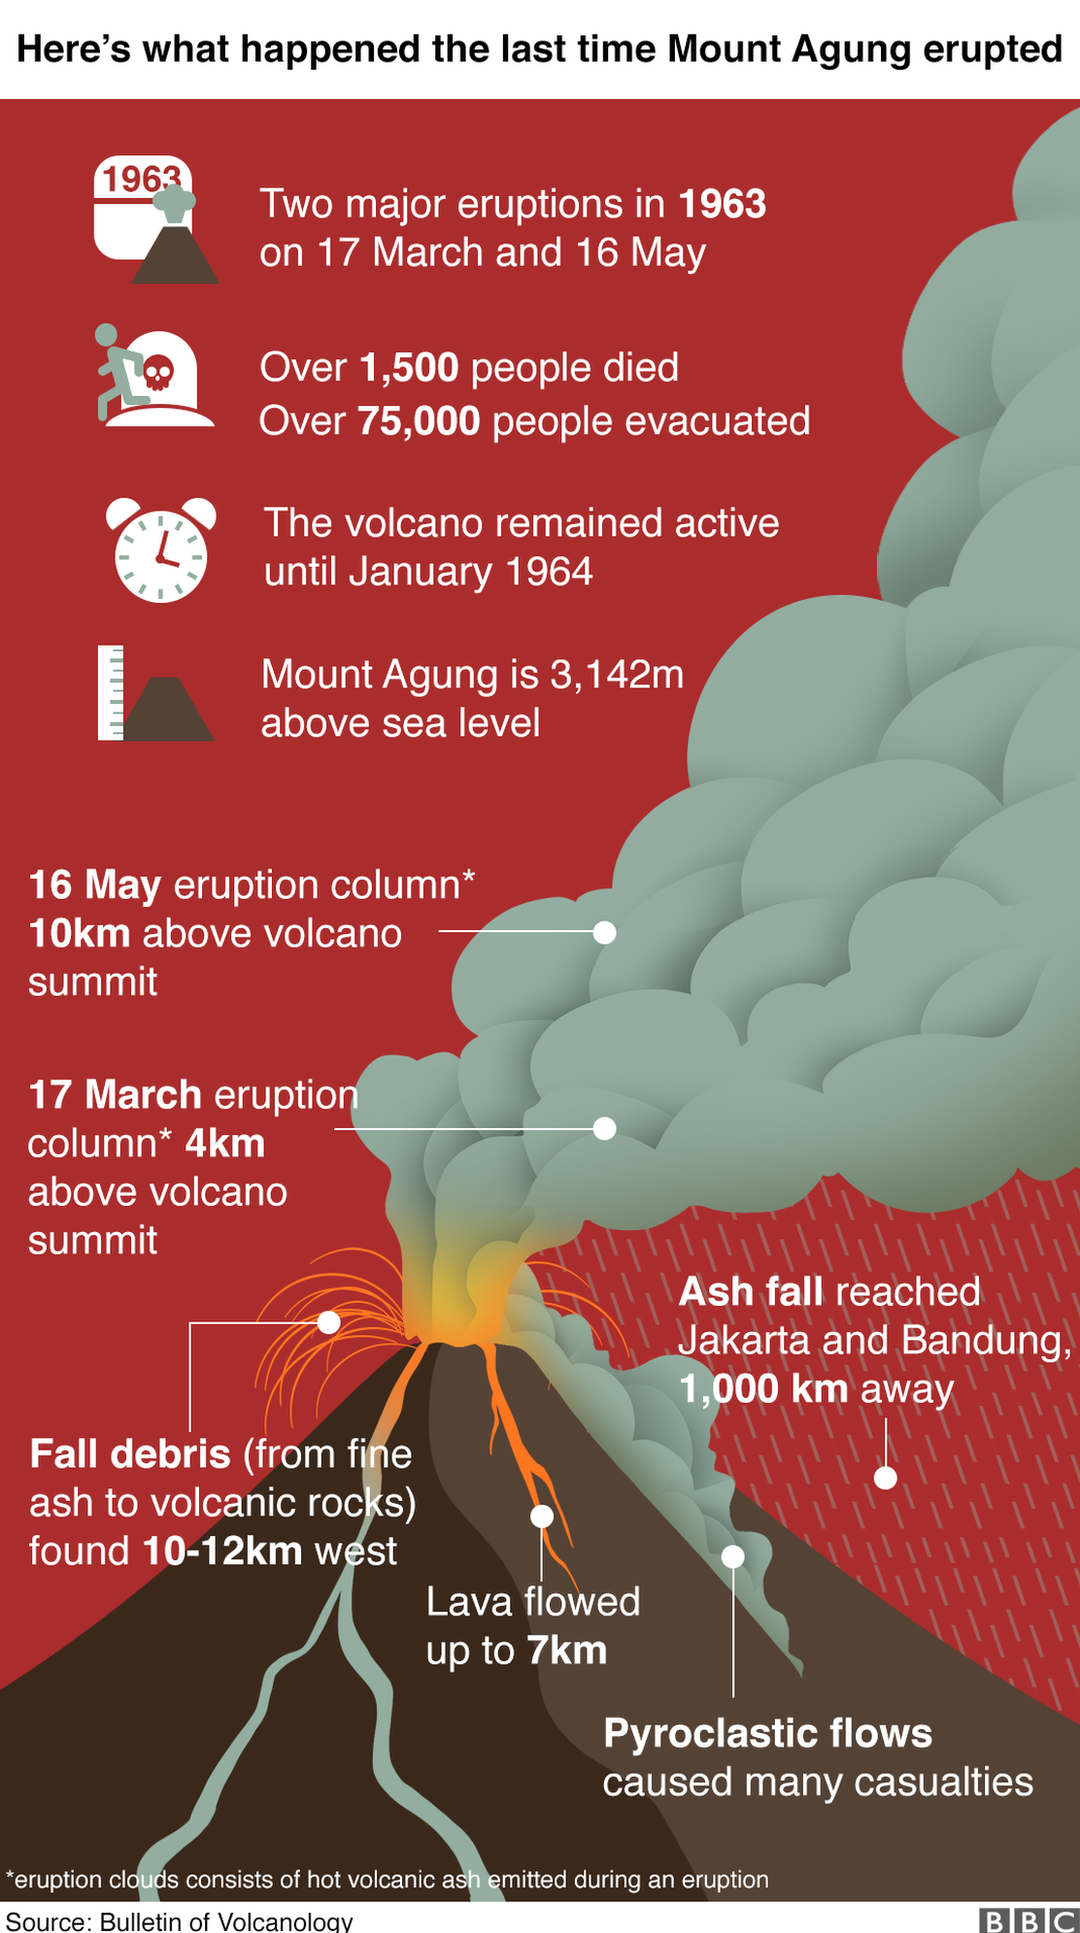 Infographic showing what happened last time Mount Agung erupted